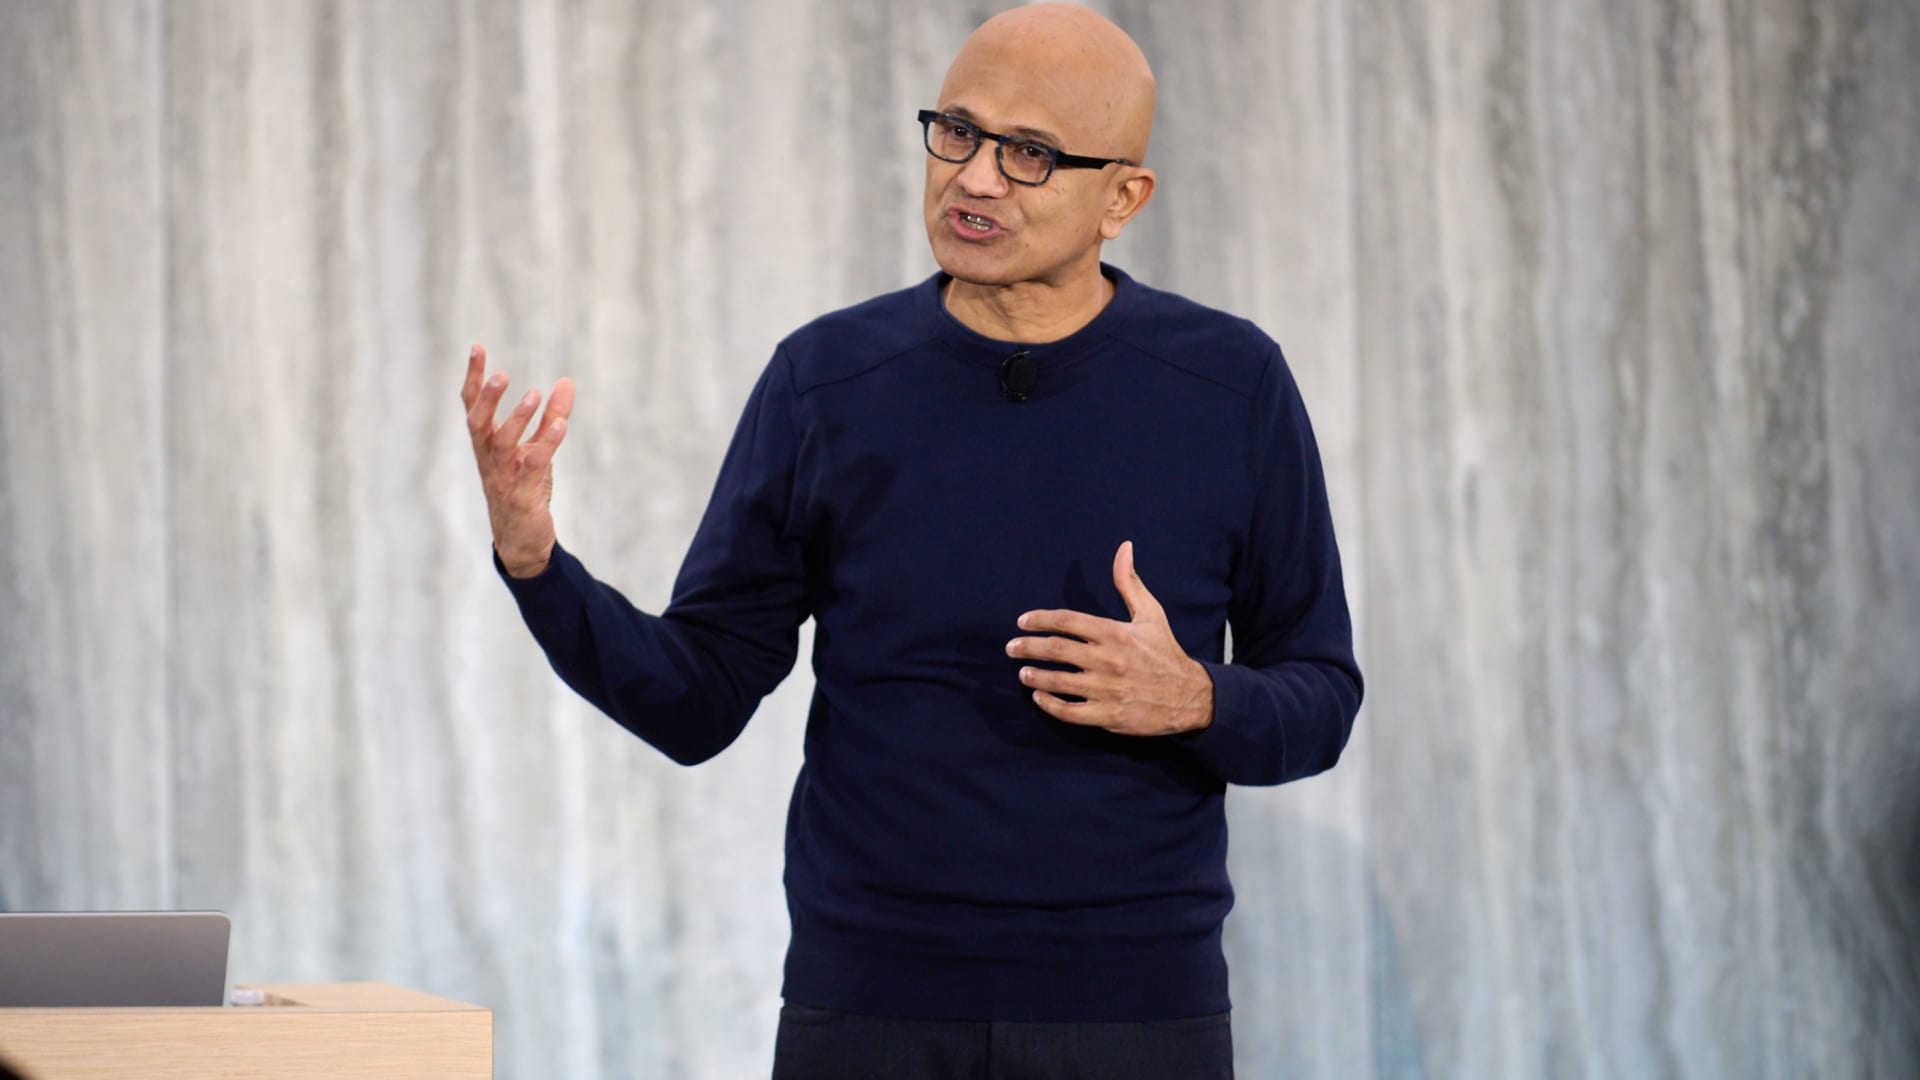 Microsoft will make ChatGPT tech available for other companies to customize, source says